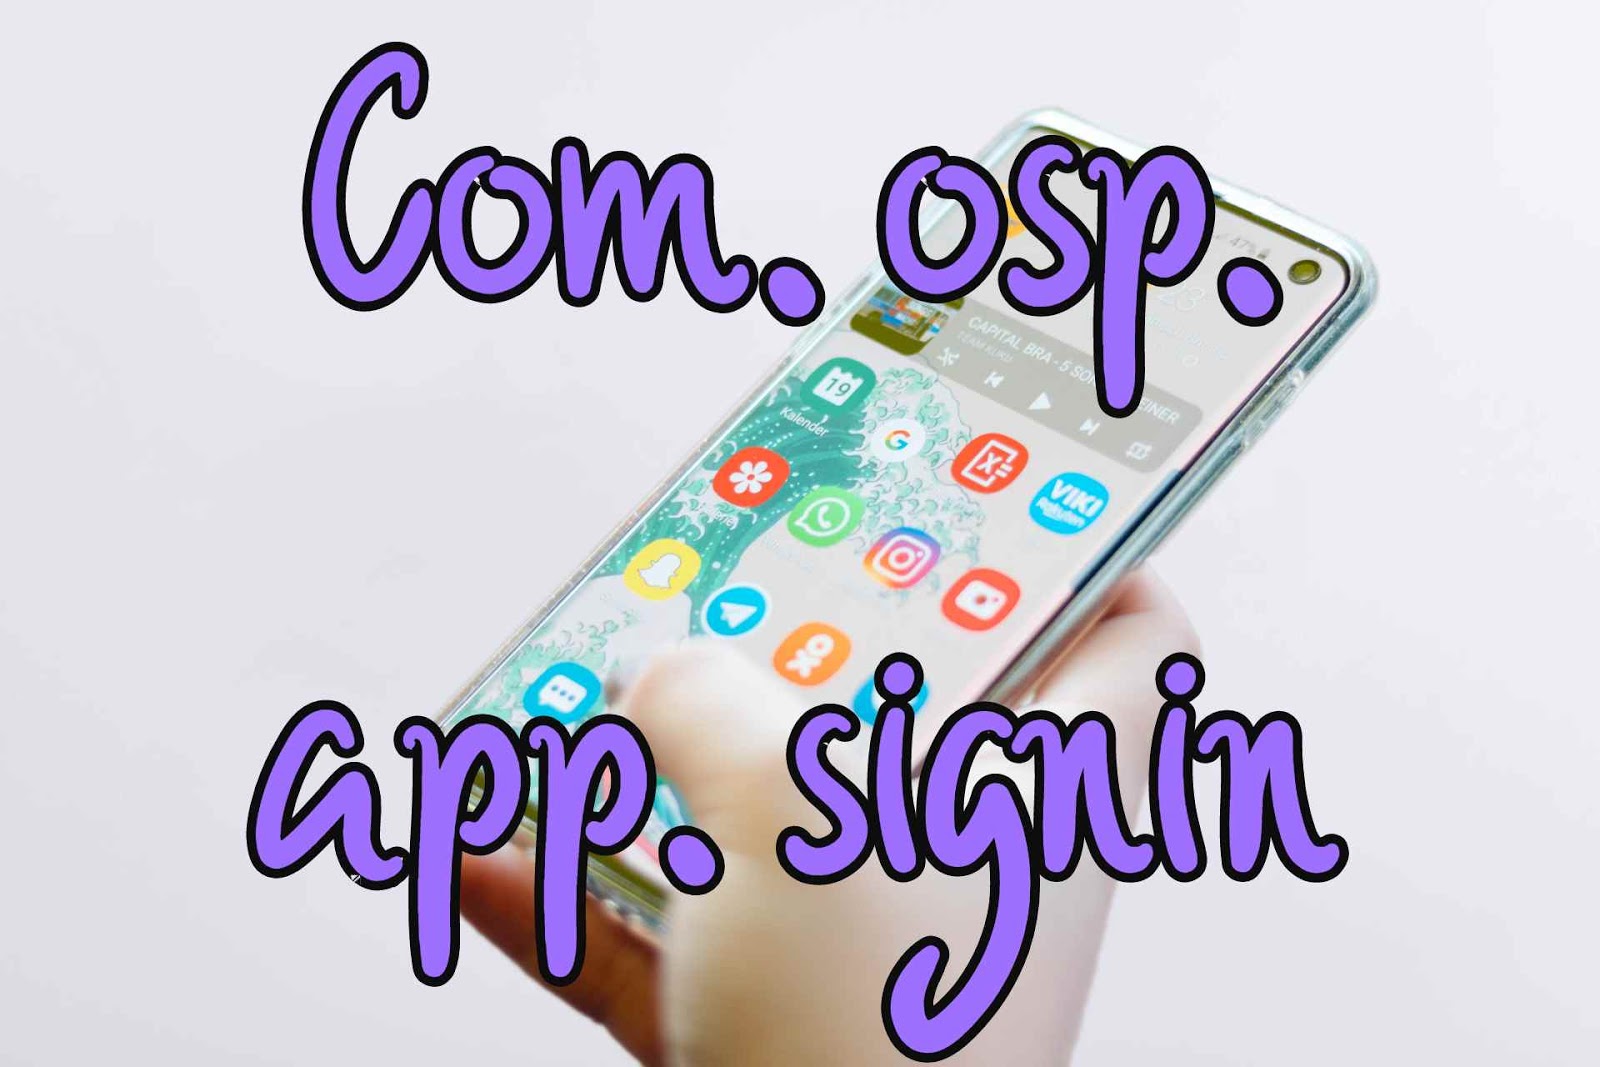 What Does Used Com.osp.app.signin Mean